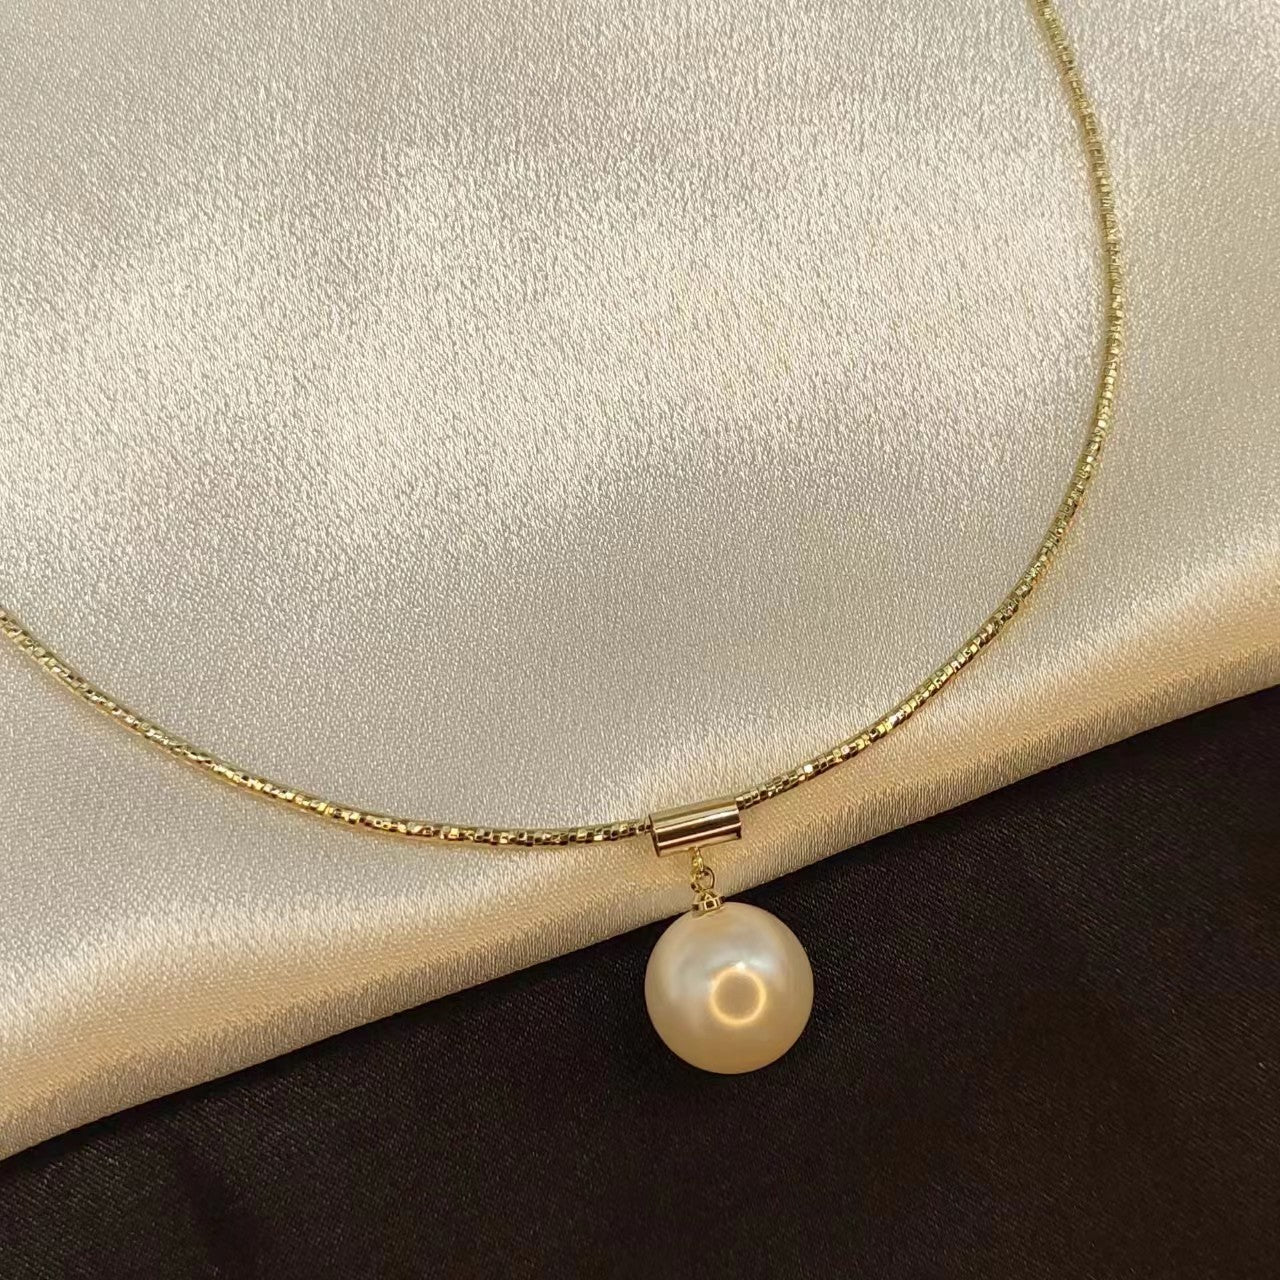 A25 Princess mermaid ( one large pearl) necklace